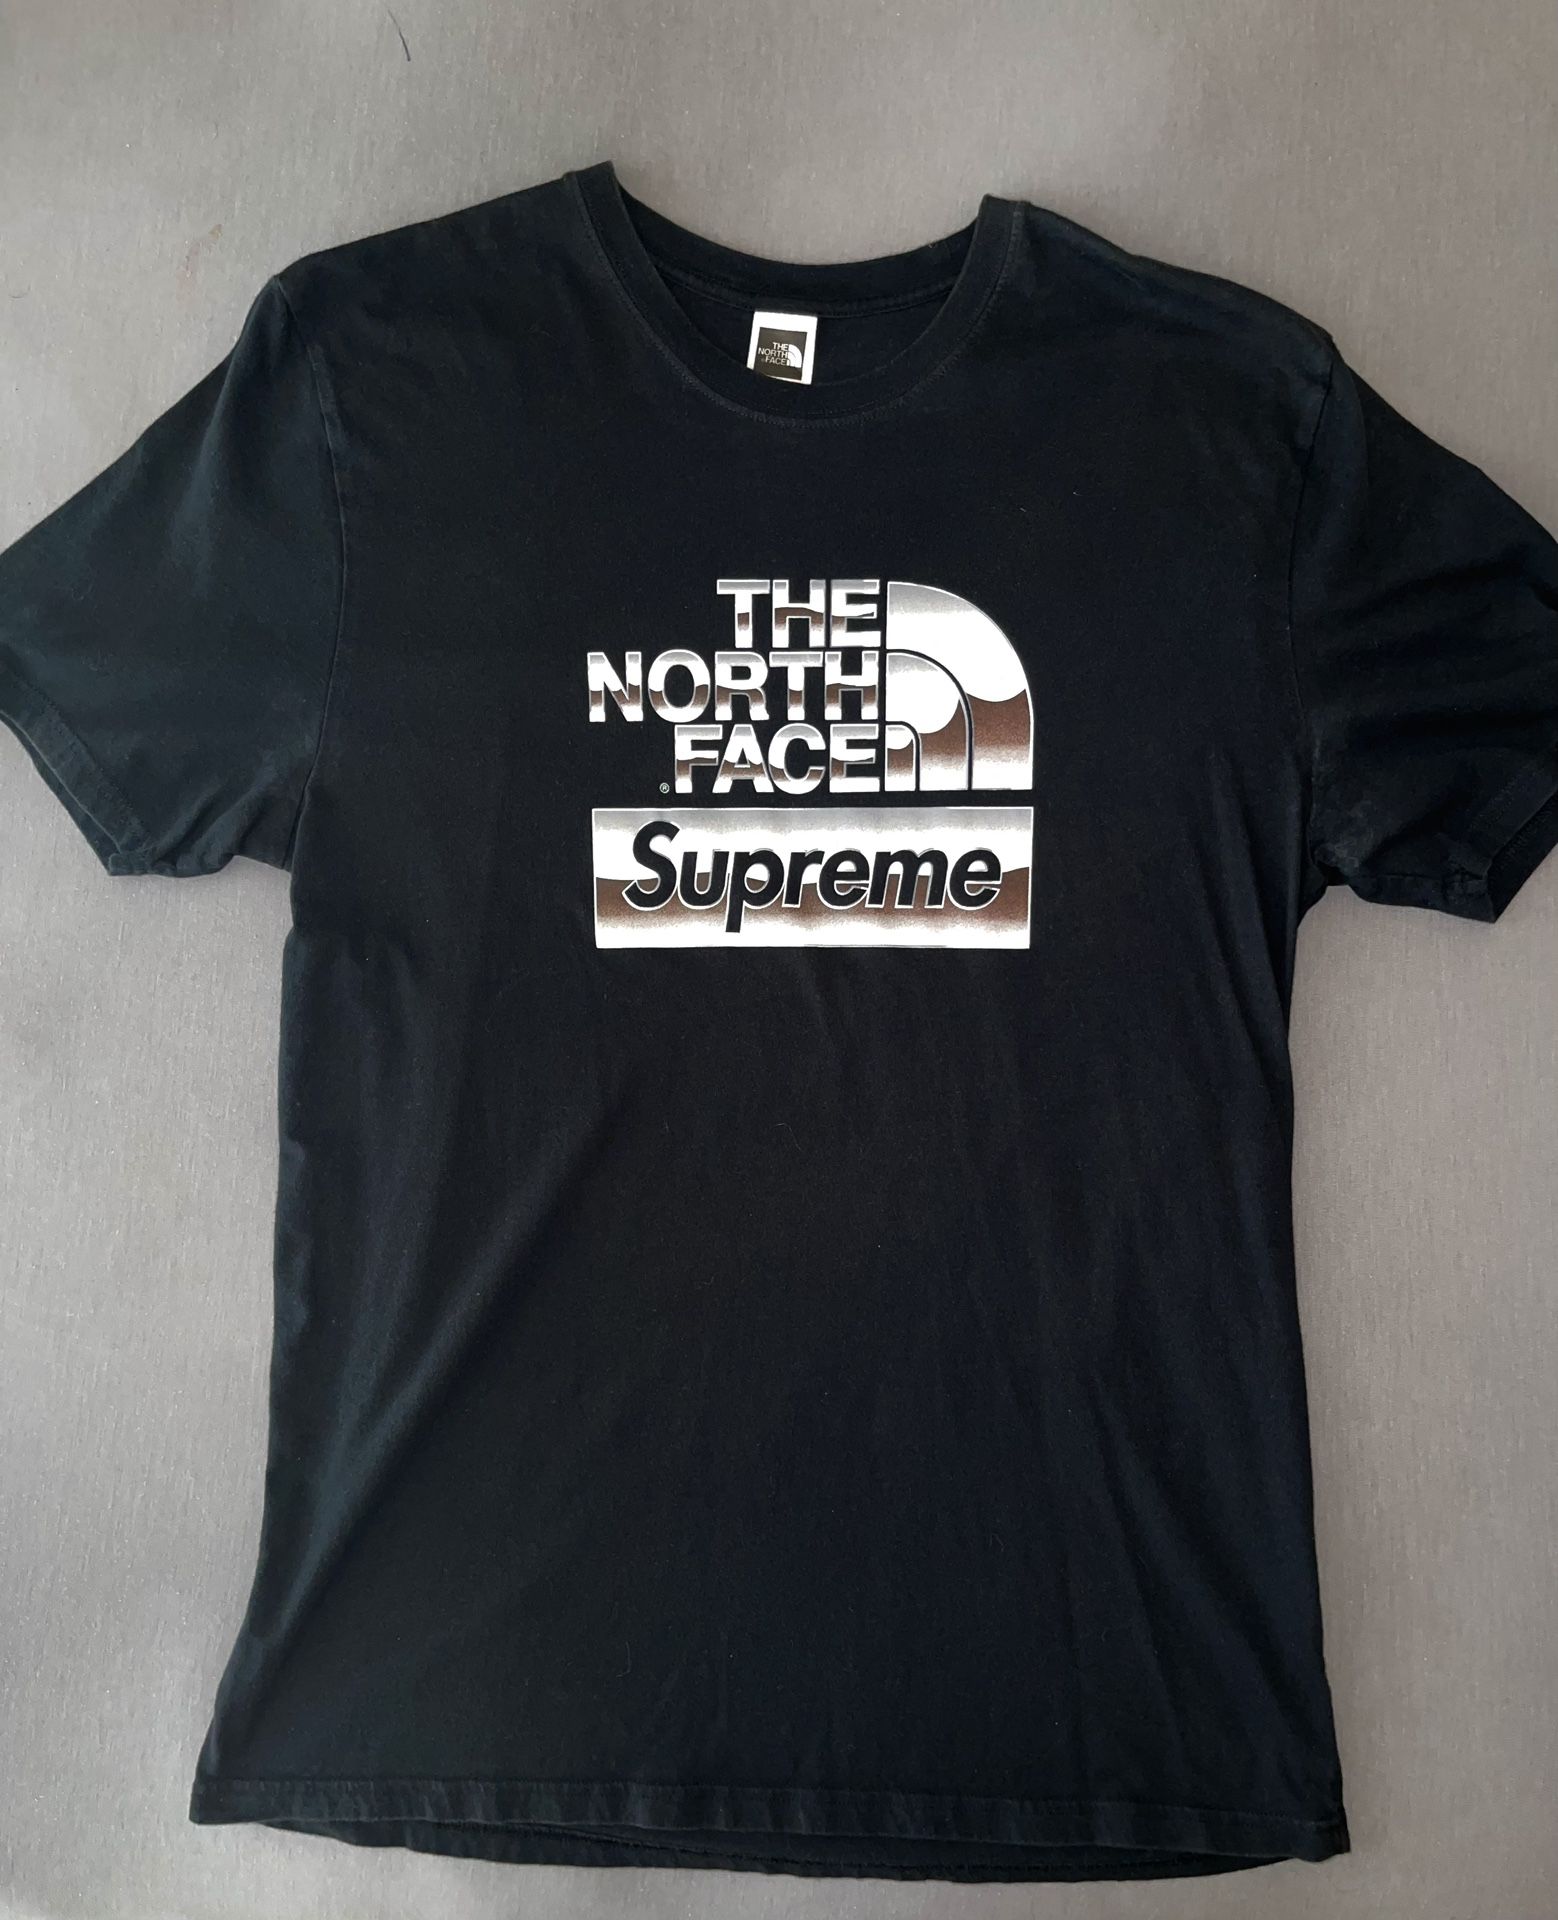 Supreme X The North Face T-Shirt